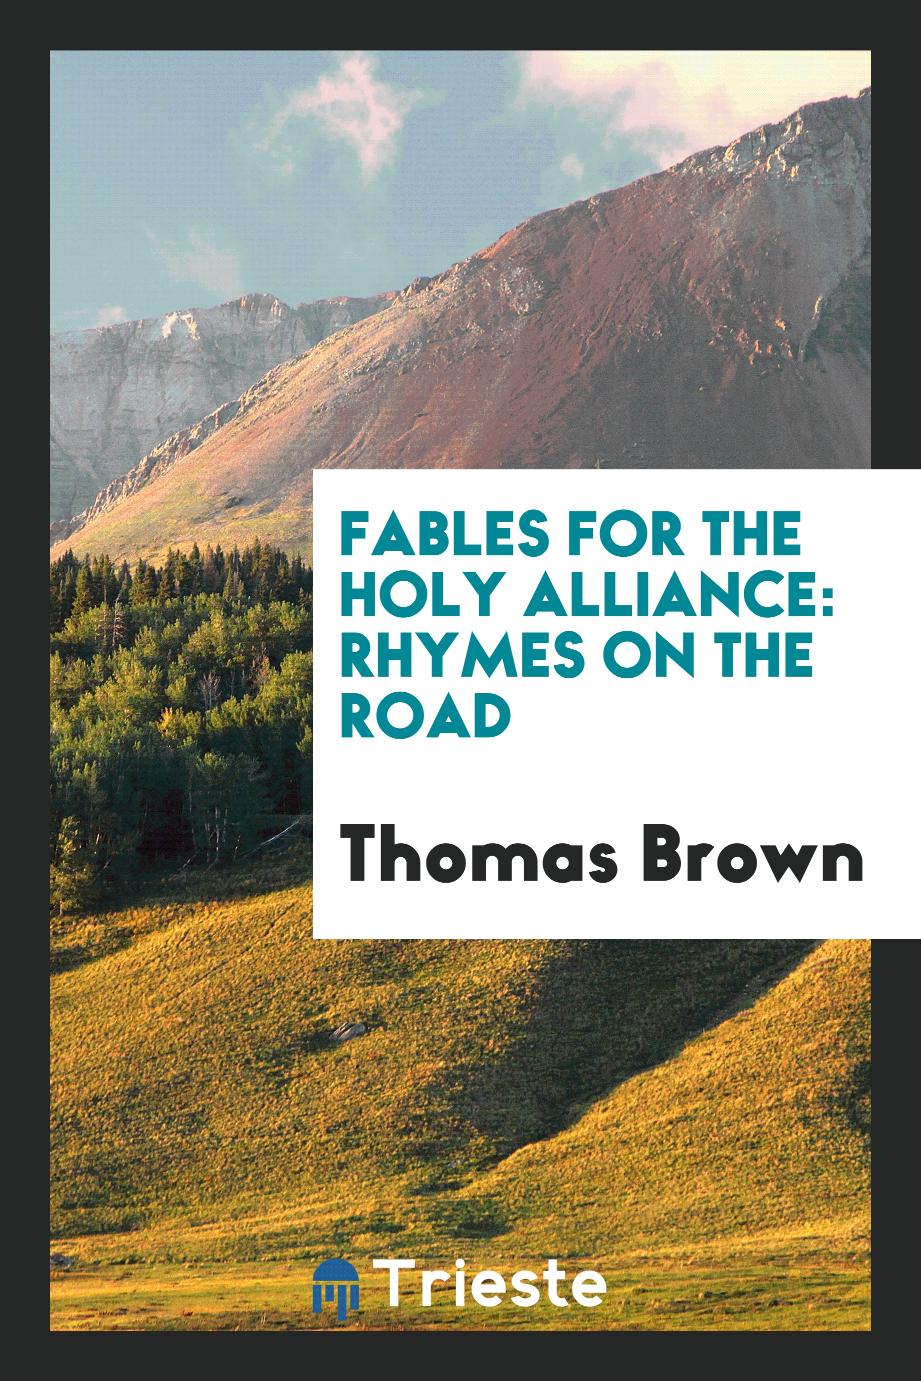 Fables for the holy alliance: rhymes on the road